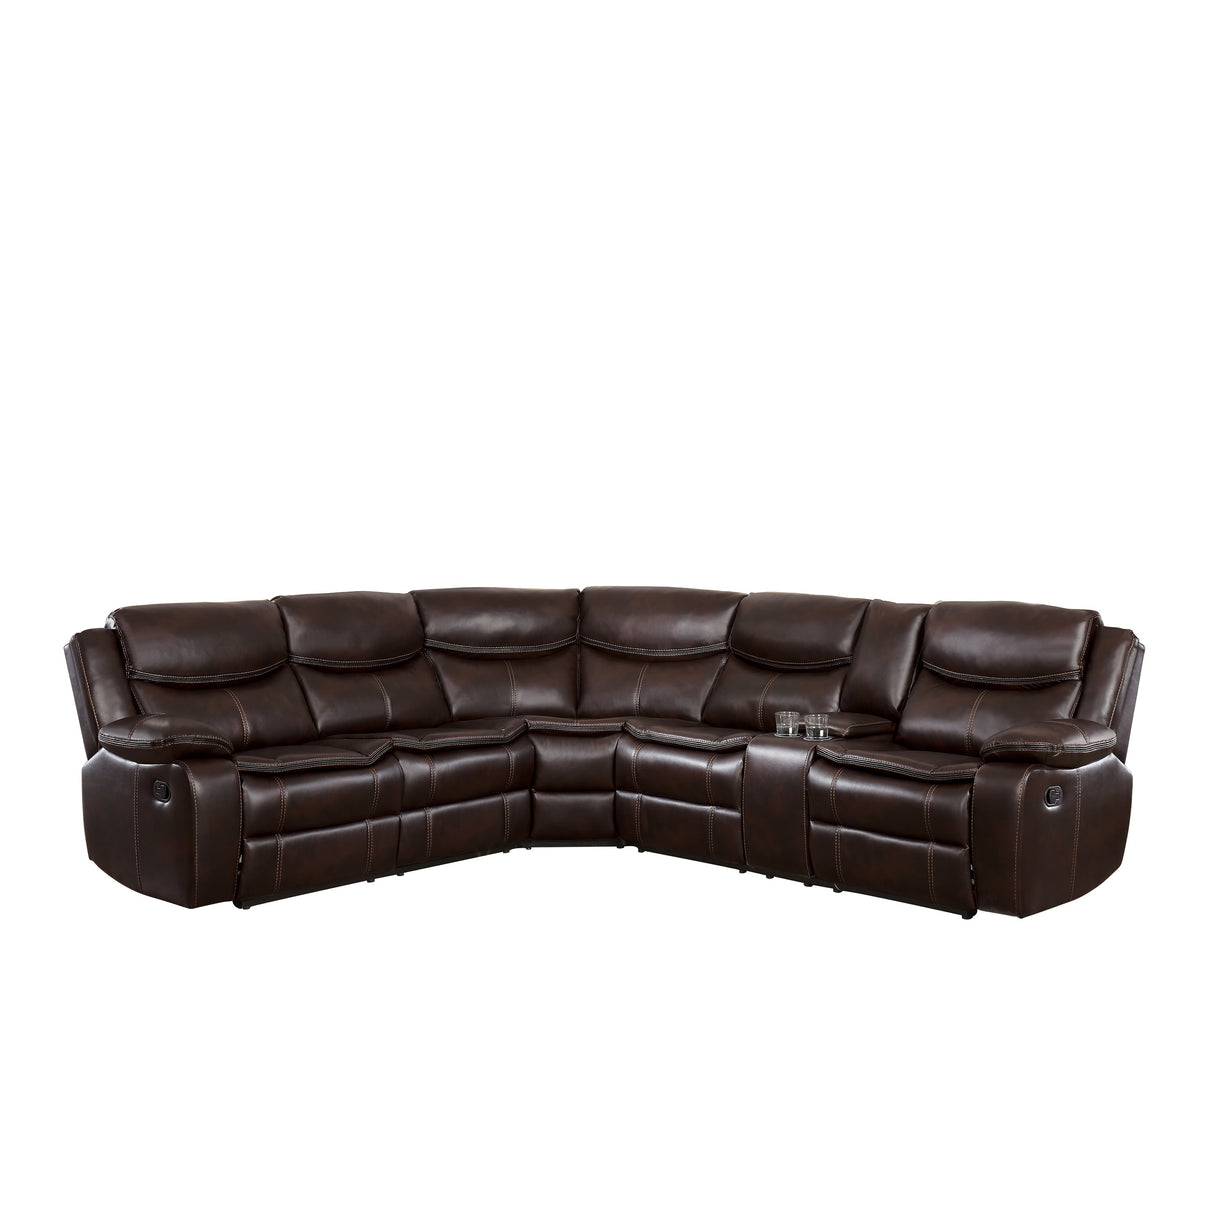 Bastrop Brown Reclining Sectional